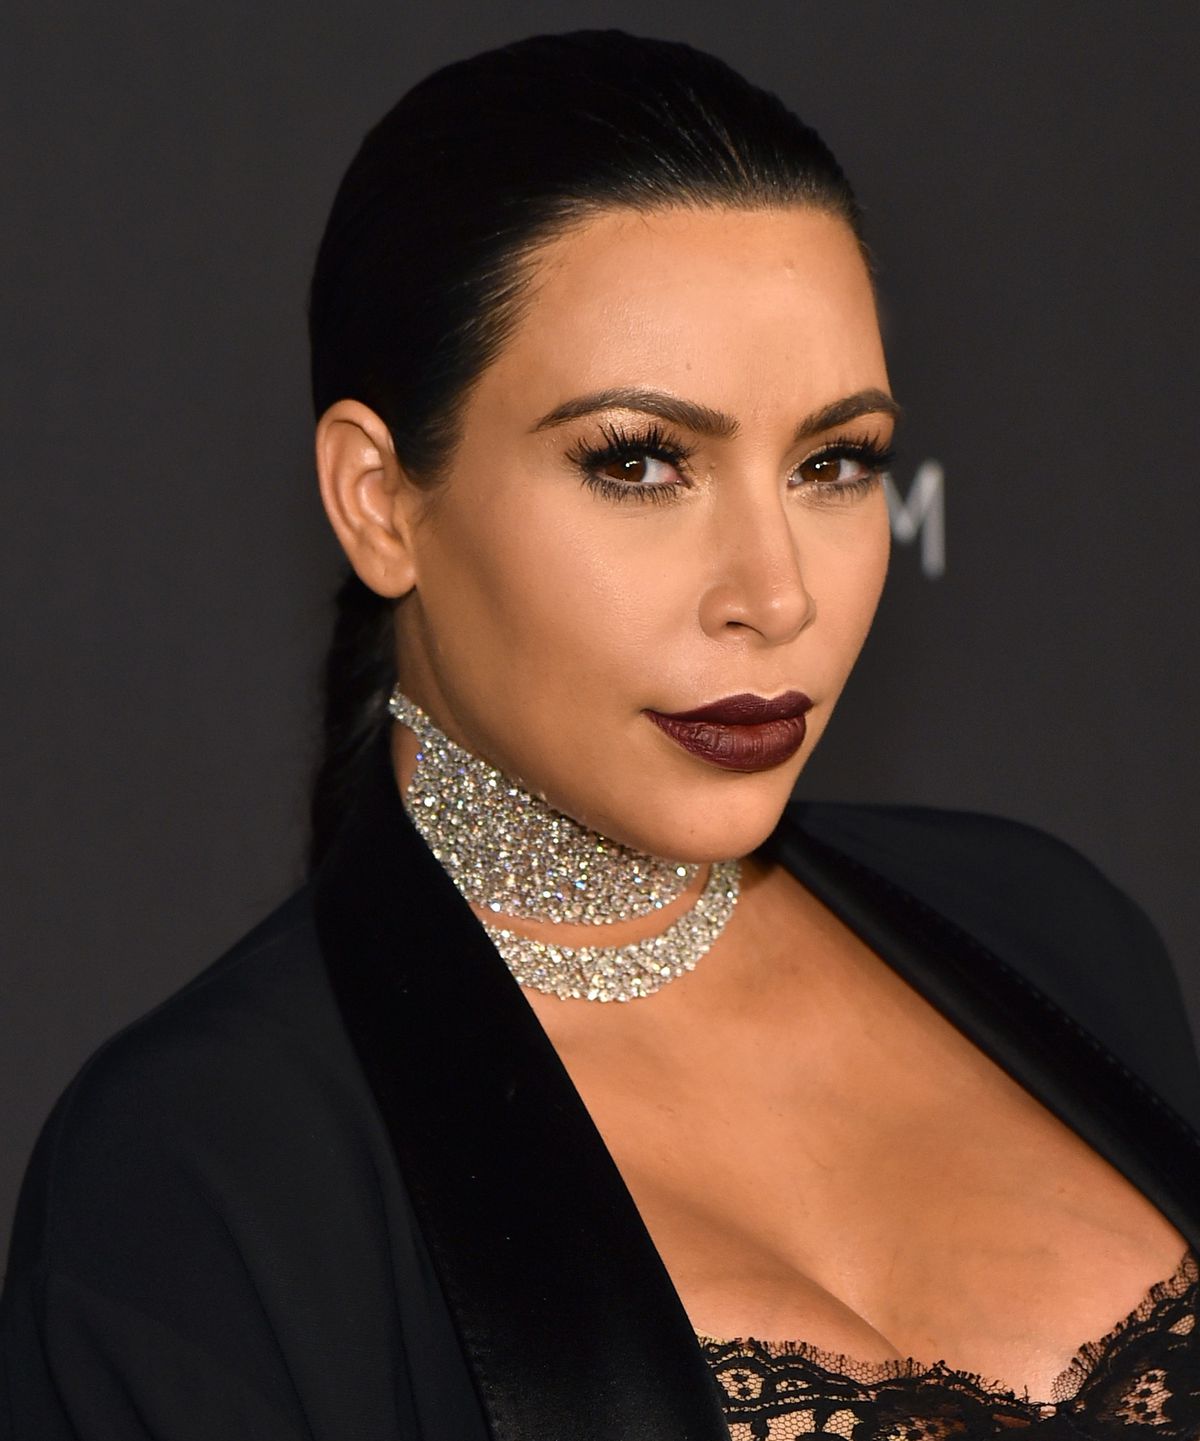 TV personality Kim Kardashian West attends LACMA 2015 Art+Film Gala Honoring James Turrell and Alejandro G Iñárritu, Presented by Gucci at LACMA on November 7, 2015 in Los Angeles, California.